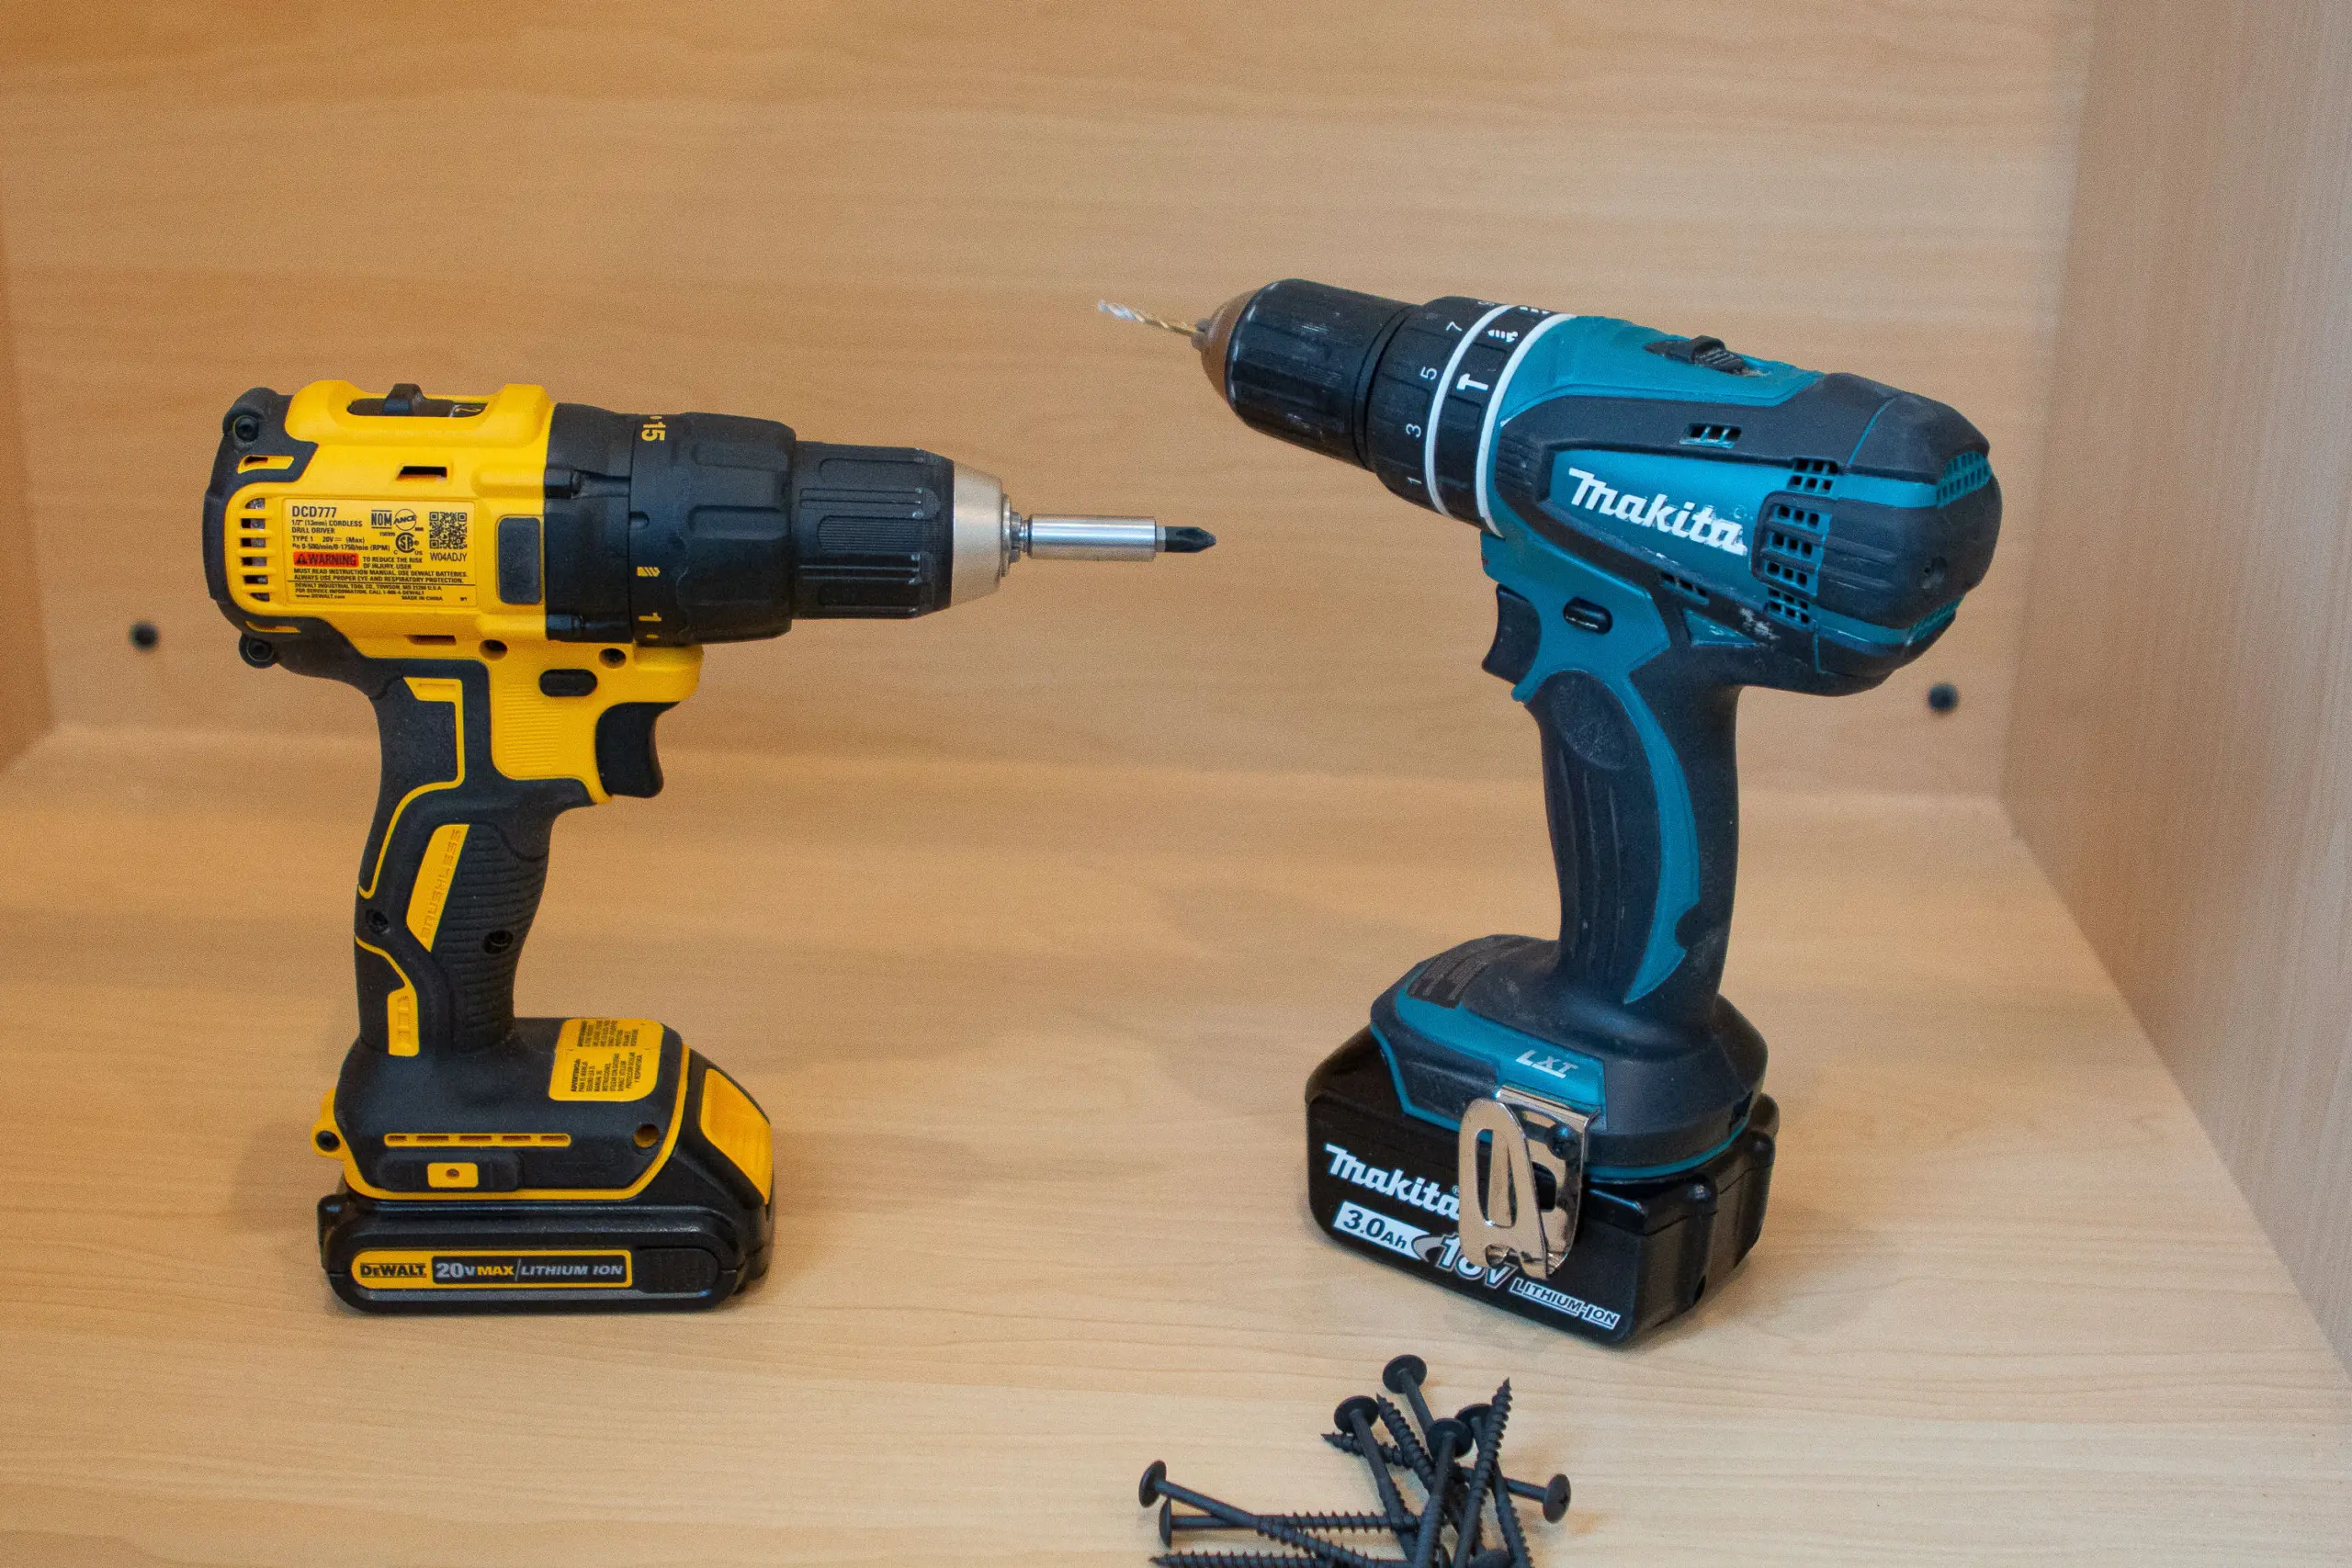 Techniques for Using a Power Drill as a Screwdriver